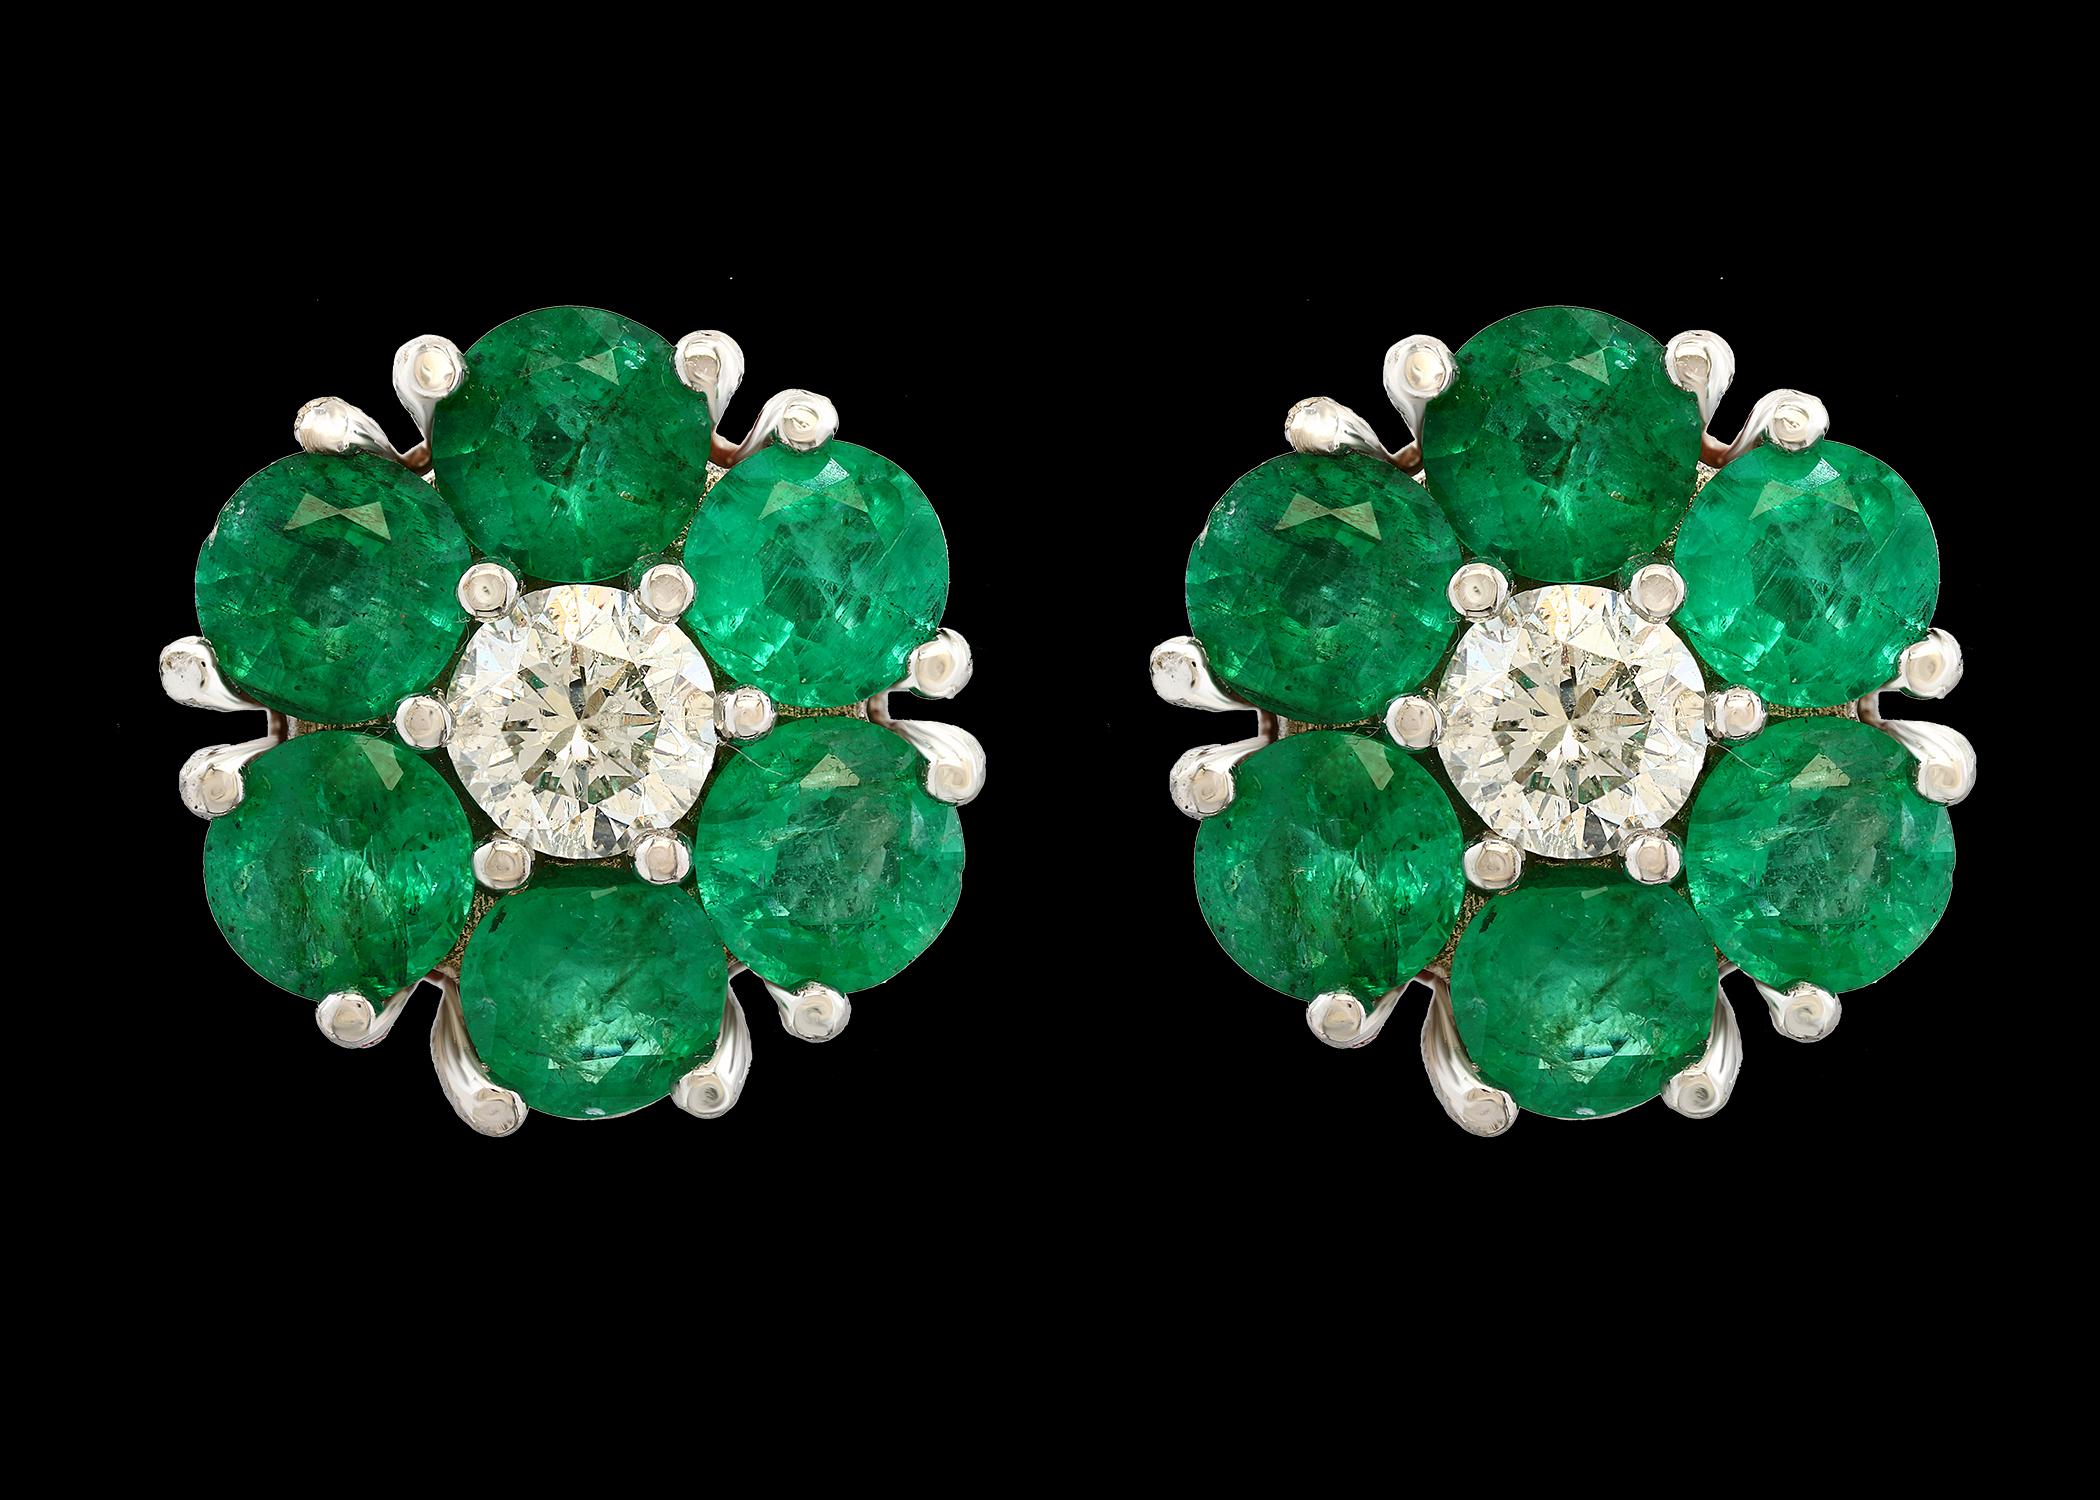 
Emerald and Solitaire Diamonds Flower Post Earrings 14 Karat White Gold 15.2MM wide flower
5 Carat  Round Cut Emerald  and 0.80  ct  solitaire diamond flower earrings
Each earring has 6 emeralds each 0.40ct , Total weight of emerald  in one earring